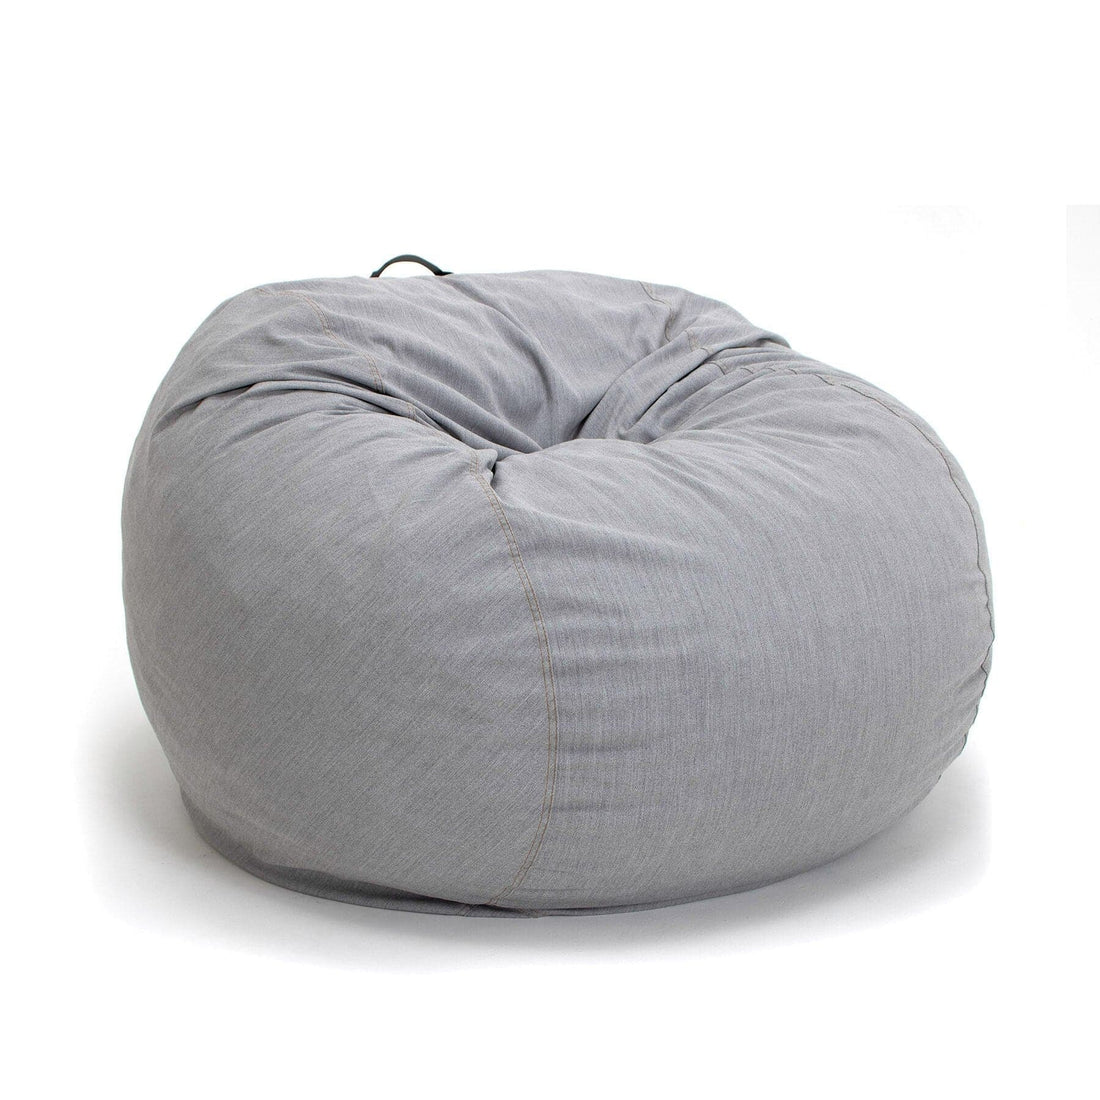 Buddy's Rest Bean Bag Set Outdoor – ContractWorld Furniture